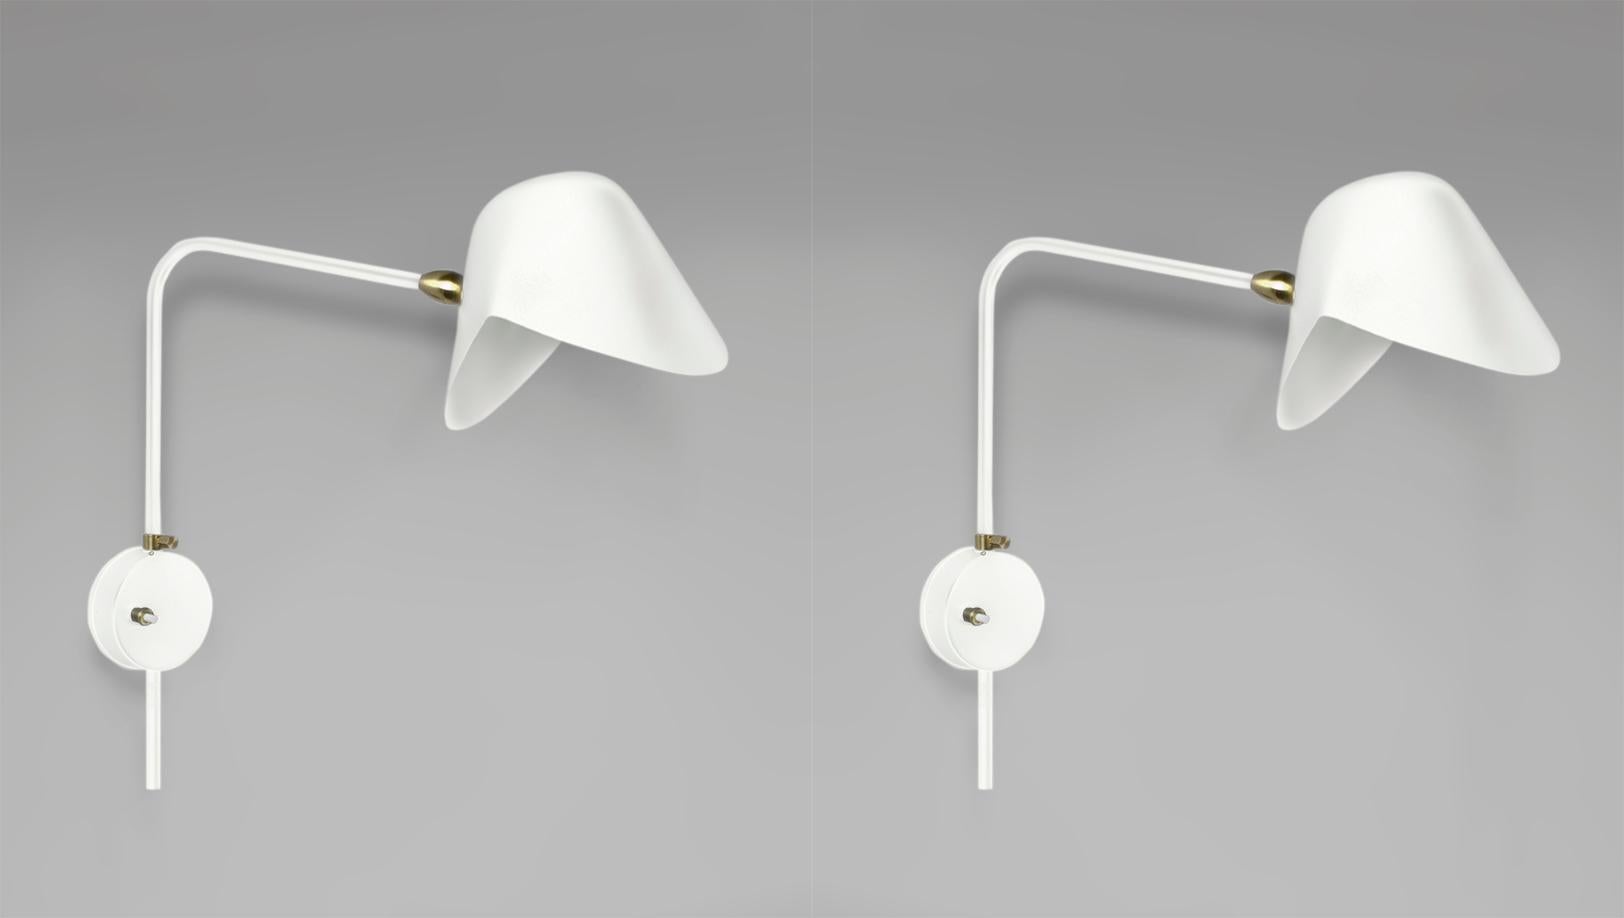 Wall sconce lamp model 'Anthony wall lamp whit round fixation box' designed by Serge Mouille in 1953.

Manufactured by Editions Serge Mouille in France. The production of lamps, wall lights and floor lamps are manufactured using craftsman’s